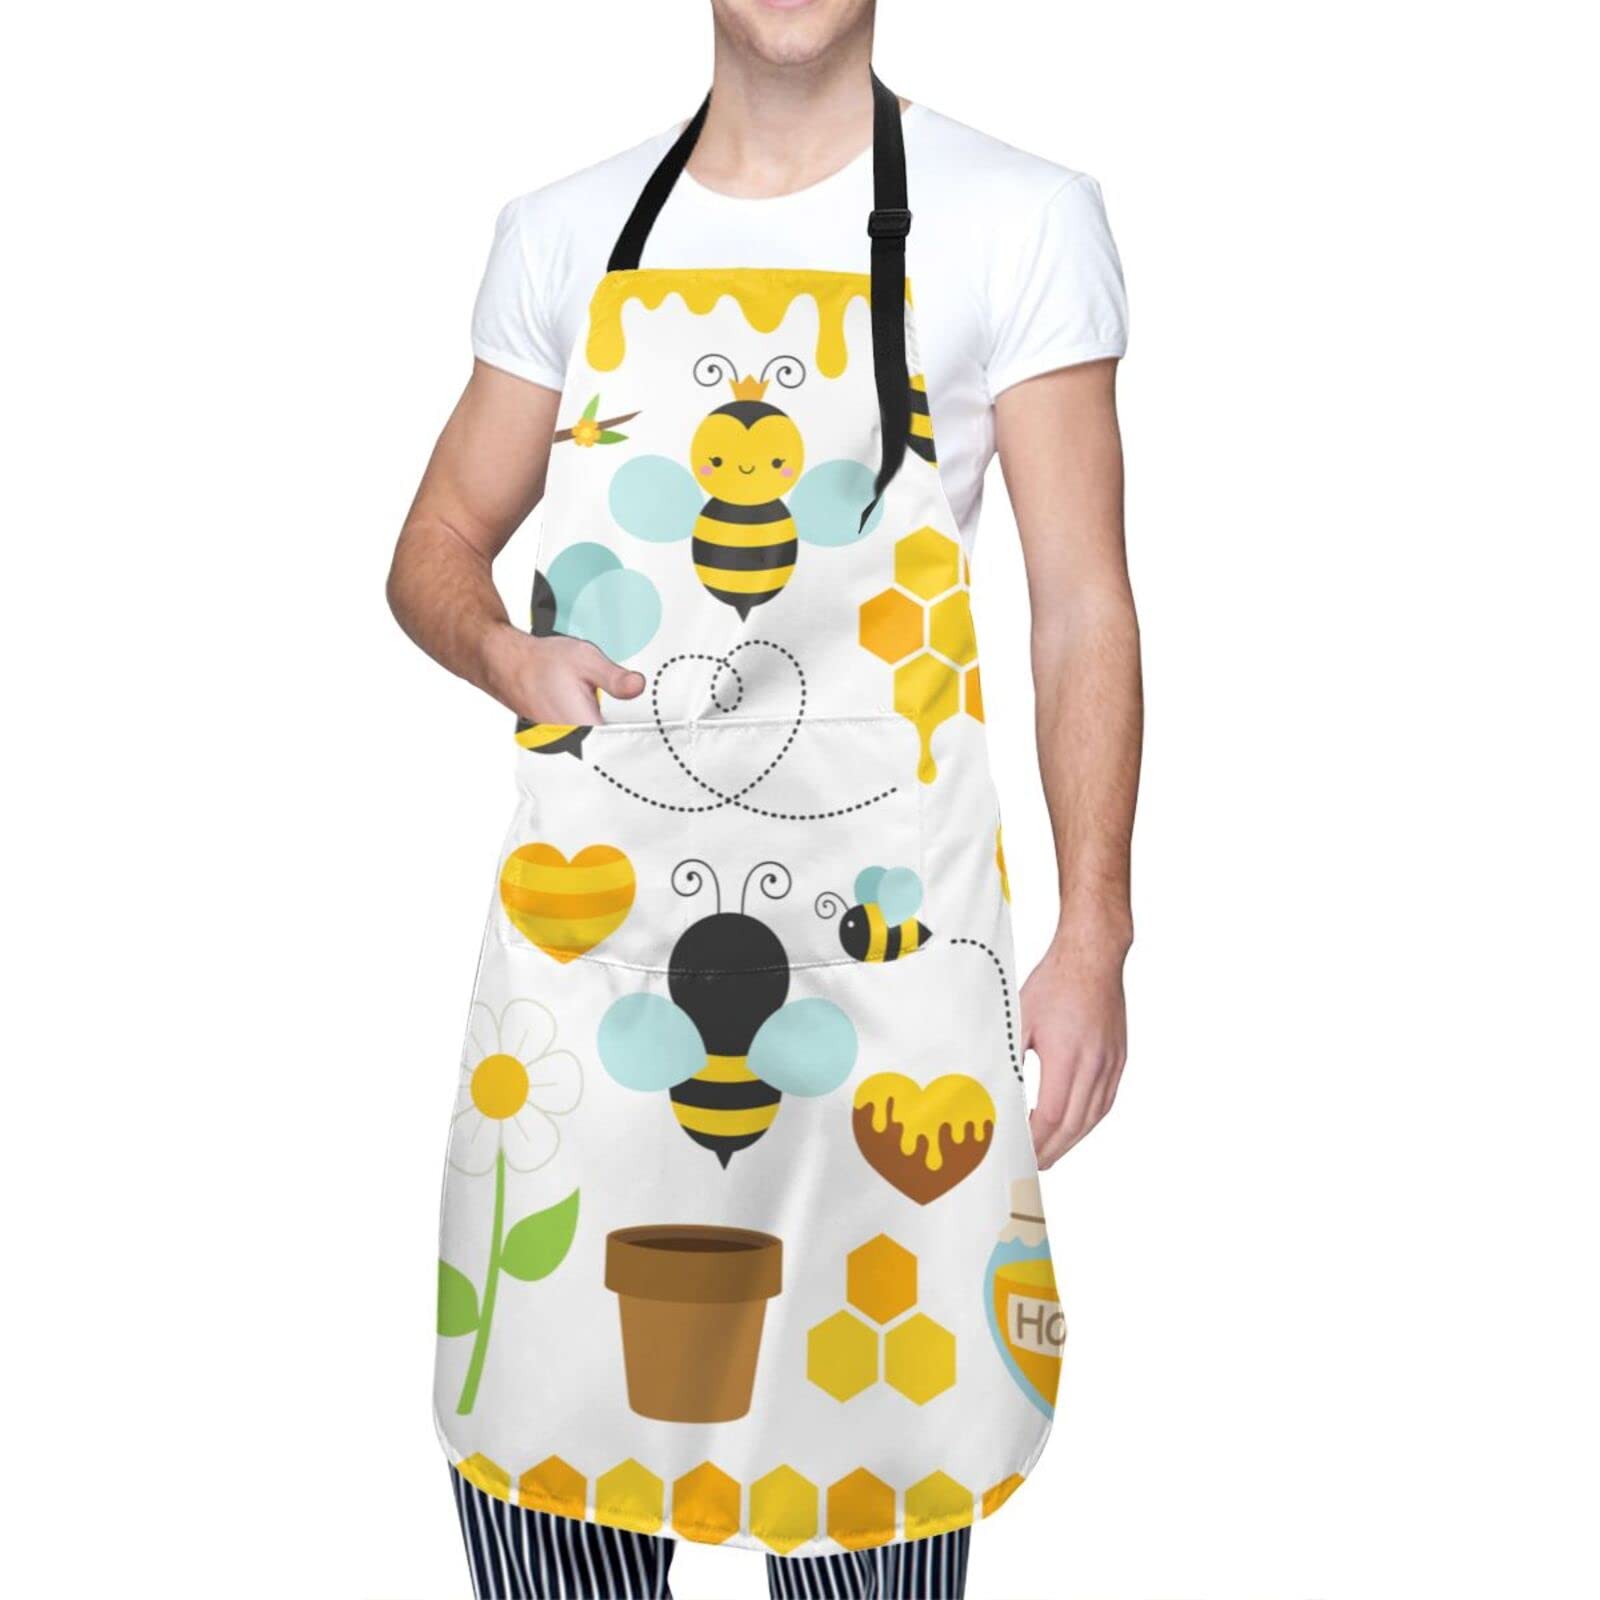 Echoserein Cute Bee Apron Adjustable Bib Aprons With 2 Pockets For Men Women Chef Waterproof Decorative For Kitchen Cooking Bbq Grilling